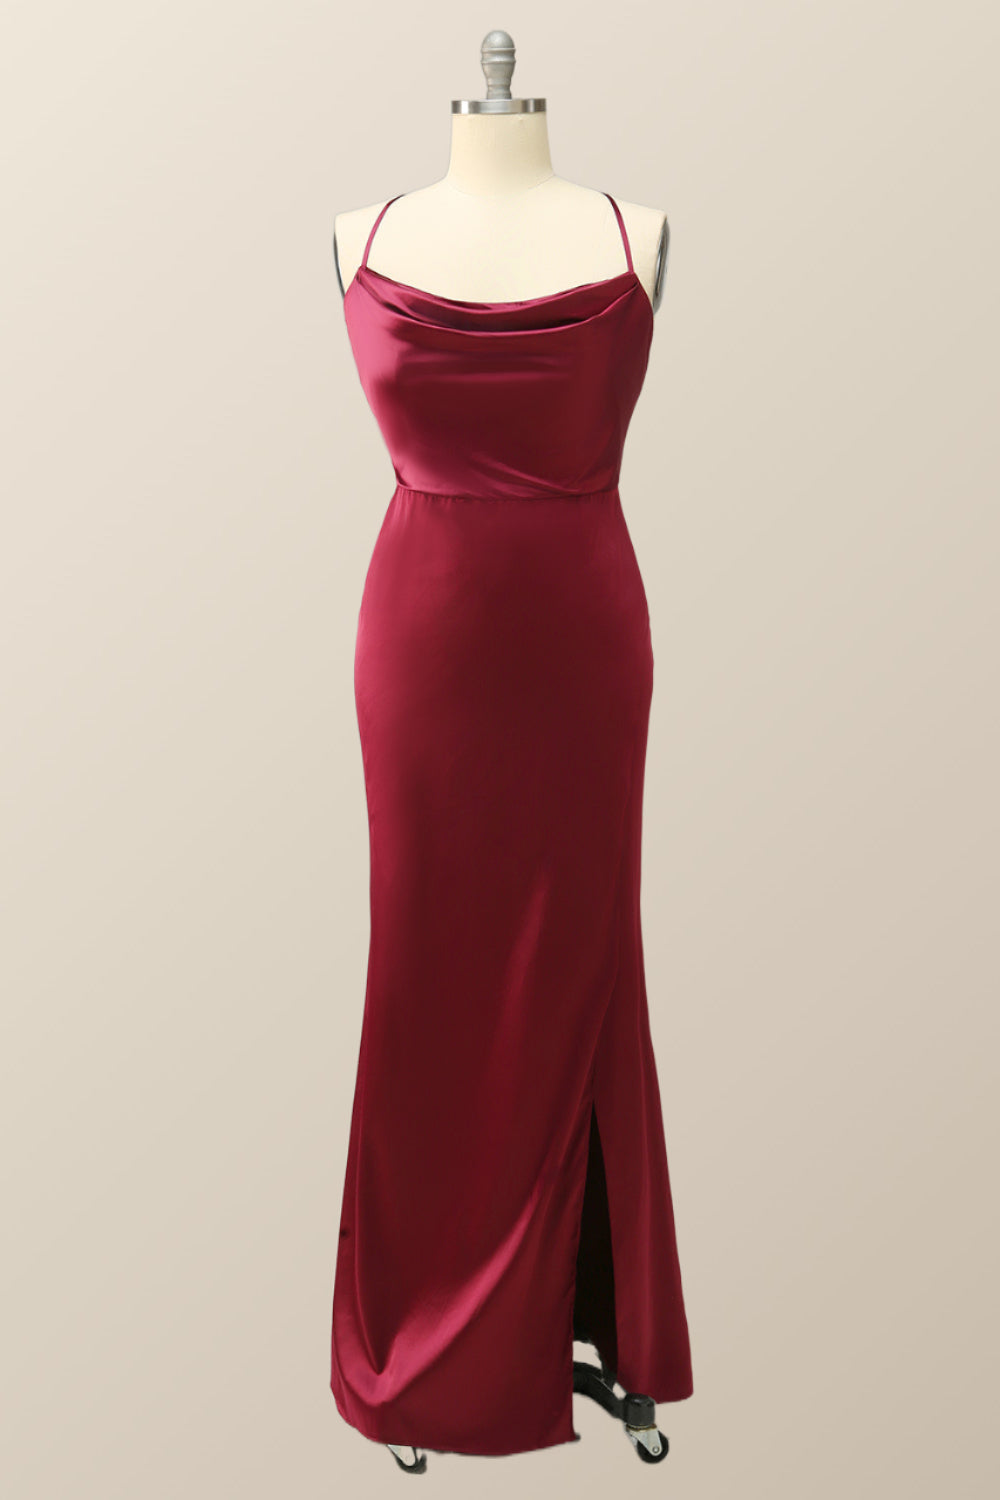 Cowl Neck Wine Red Straps Long Evening Dress